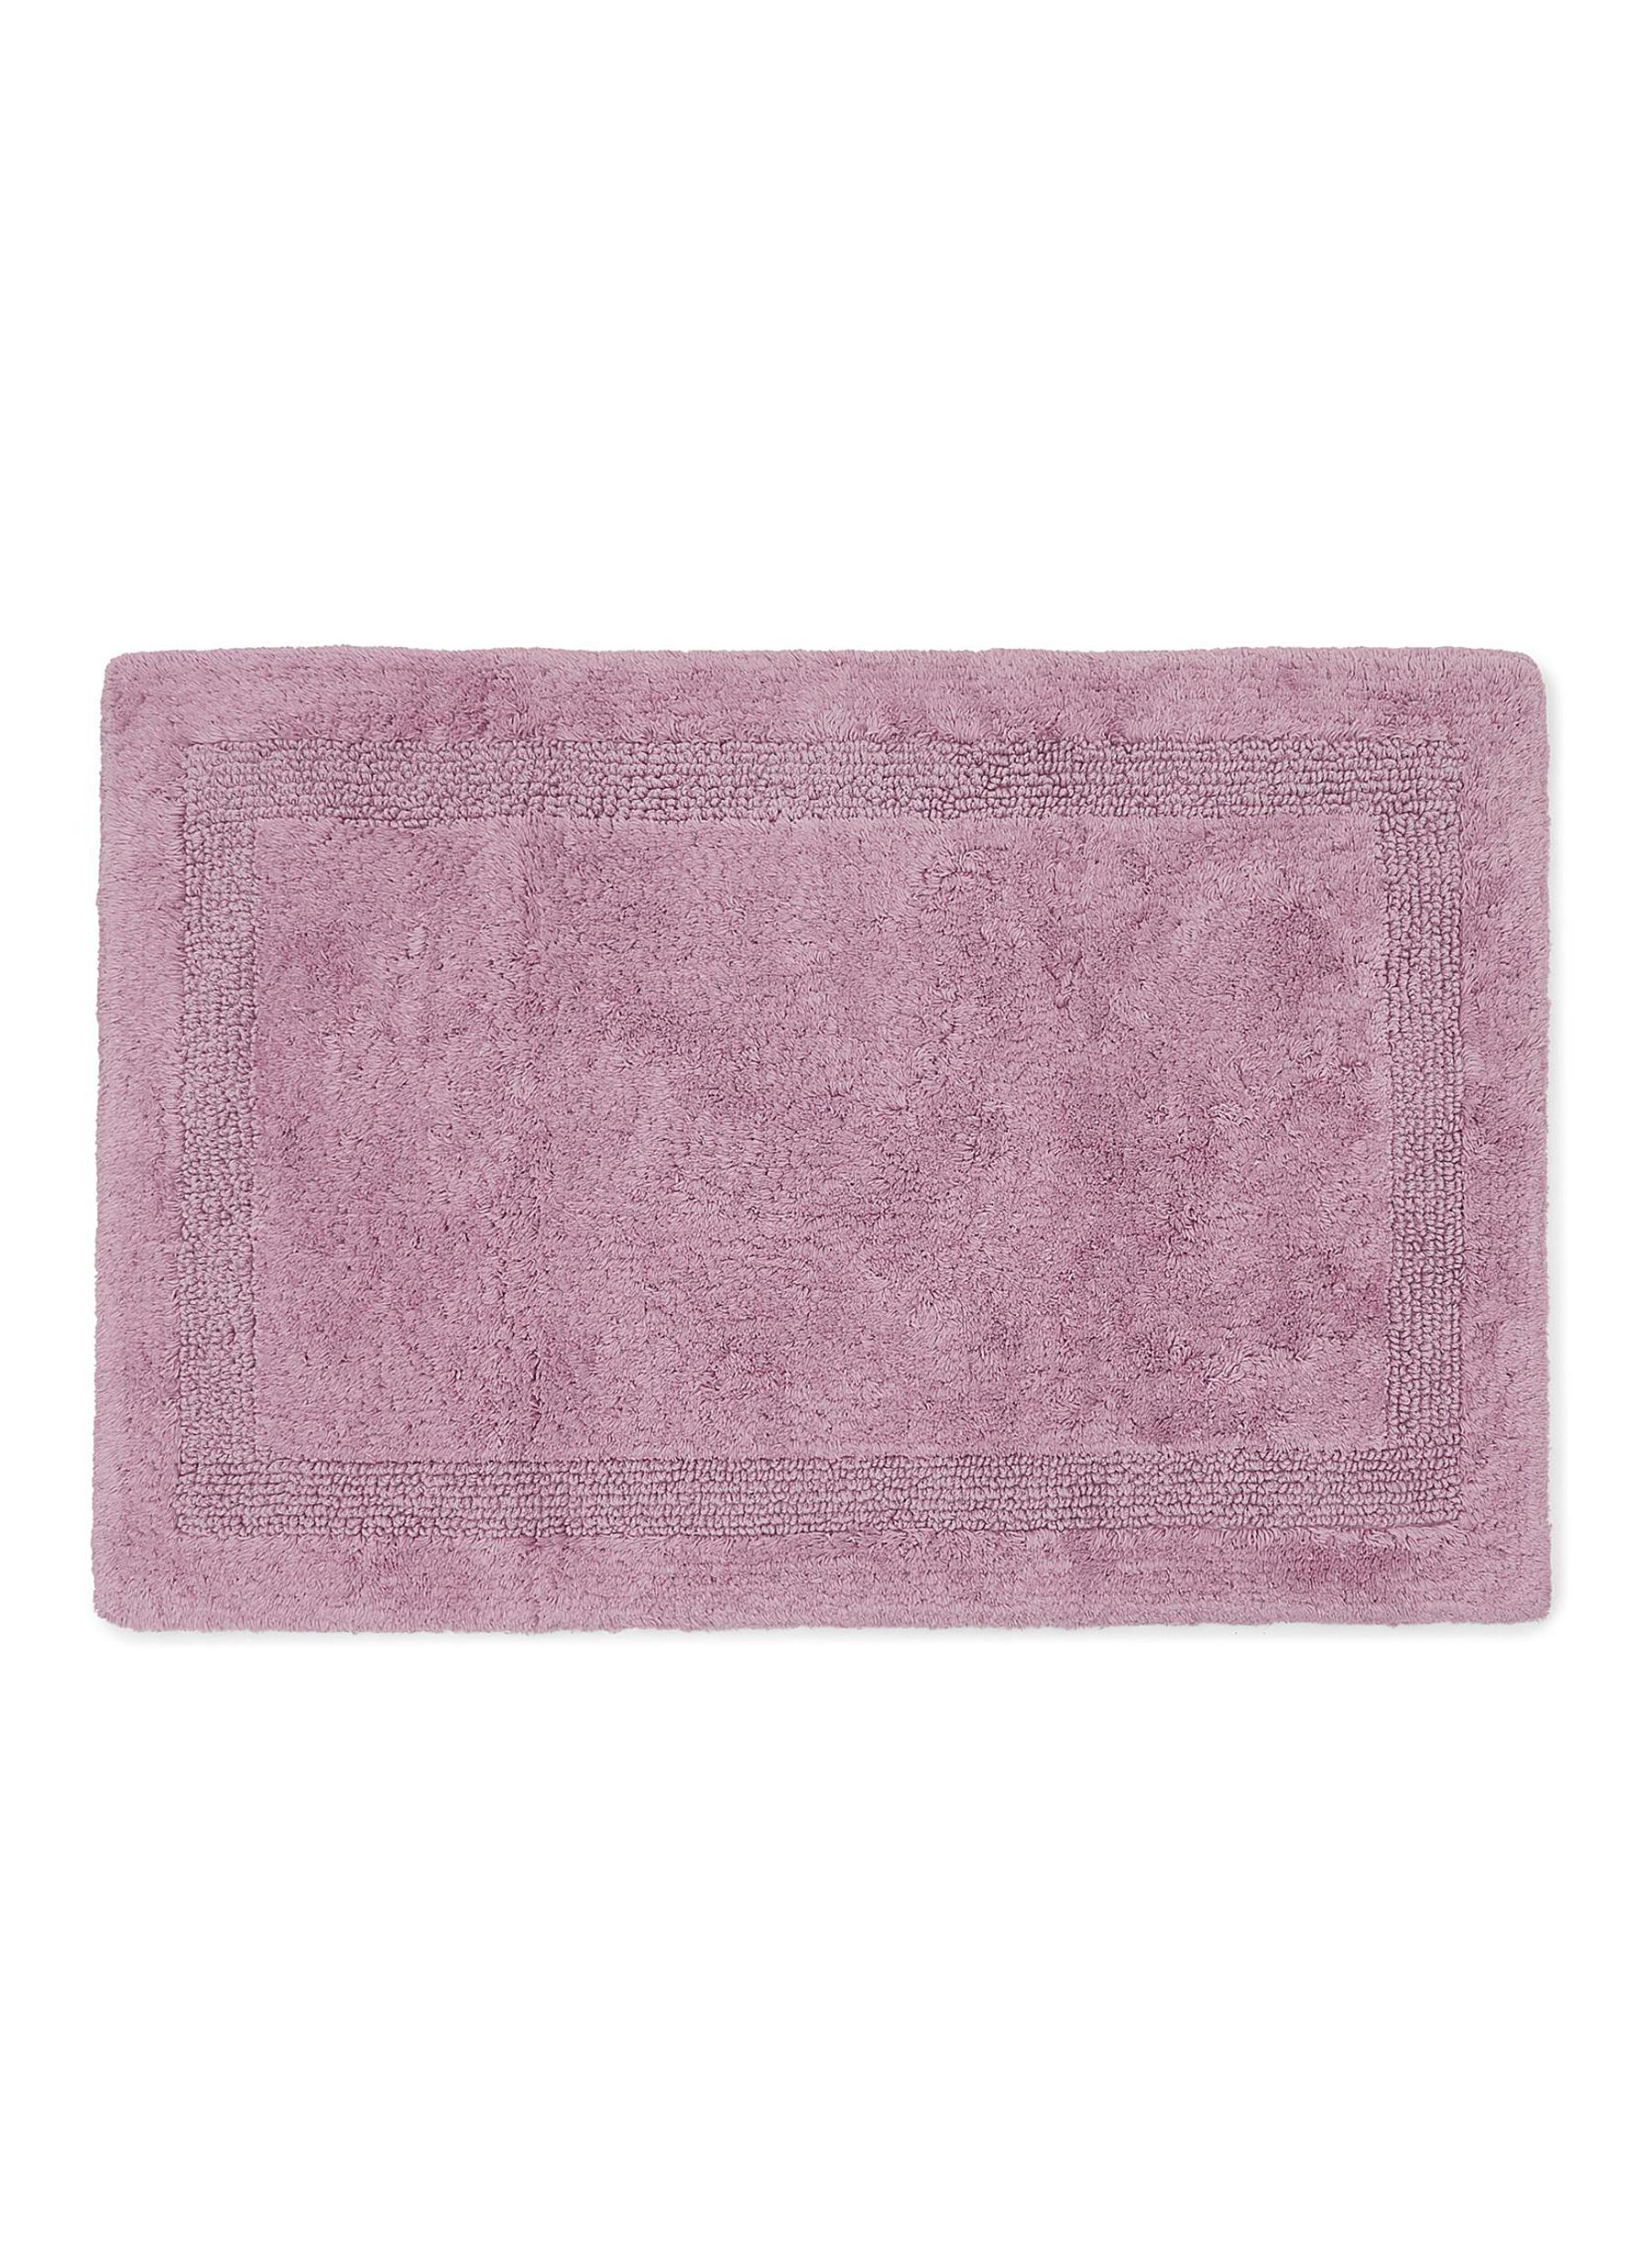 Abyss Super Pile Small Reversible Bath Mat - Orchid In Purple